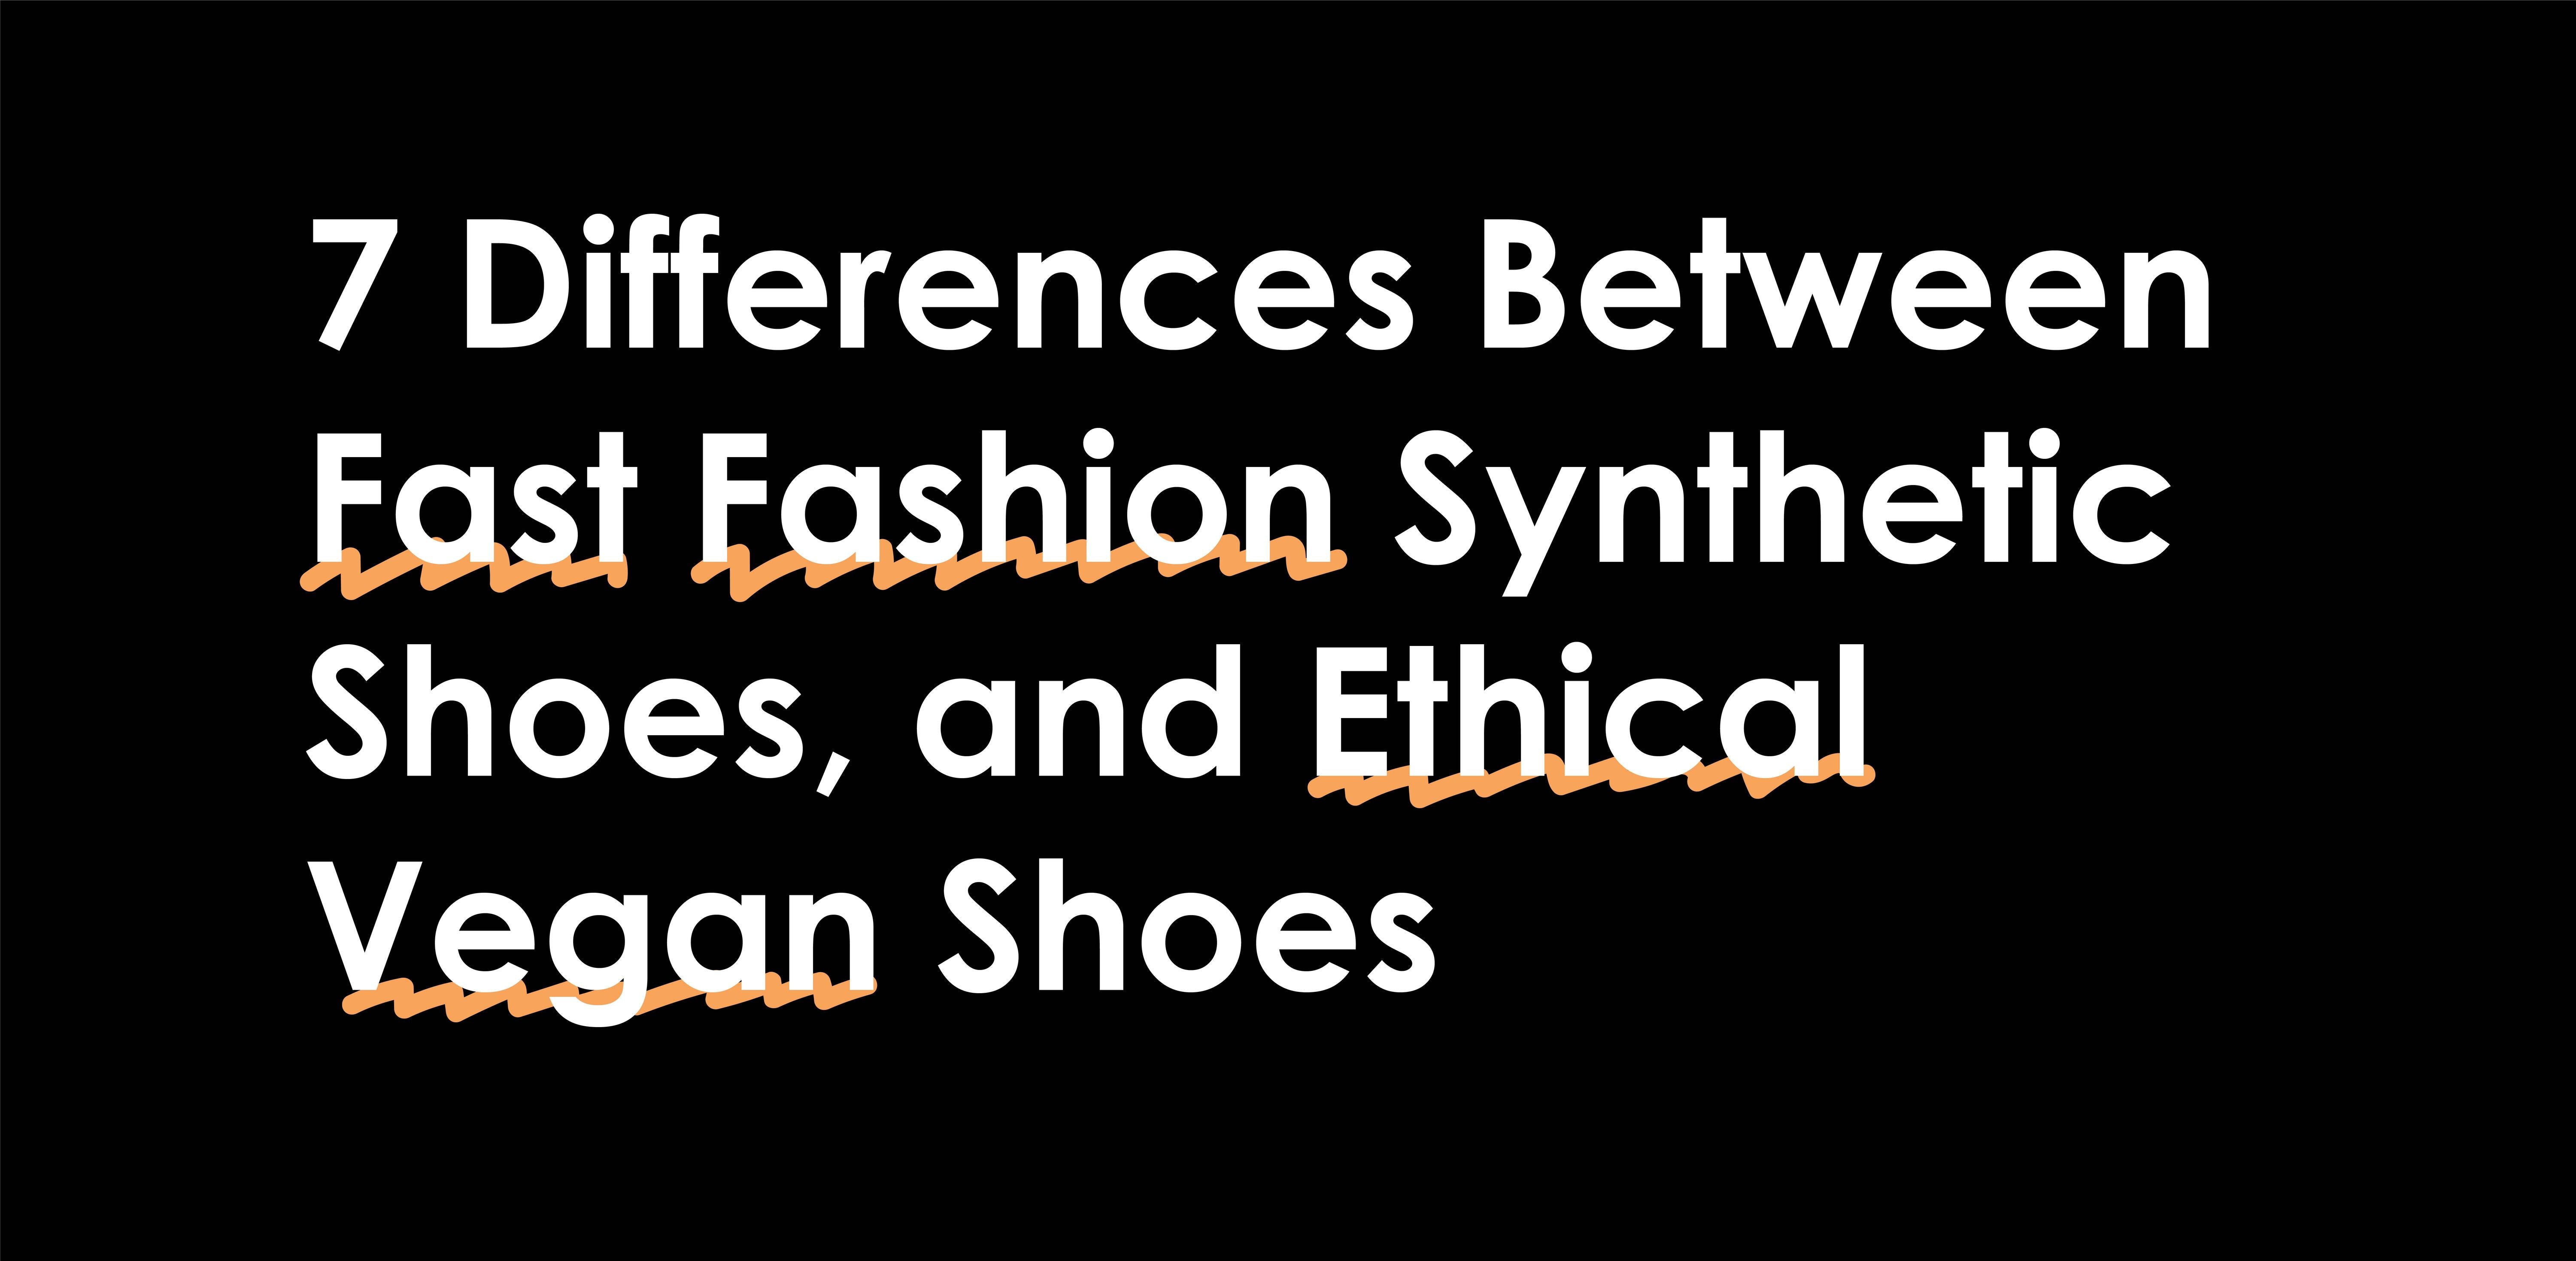 7 Differences Between Fast Fashion Synthetic Shoes, and Ethical Vegan Shoes  | Vegan Style